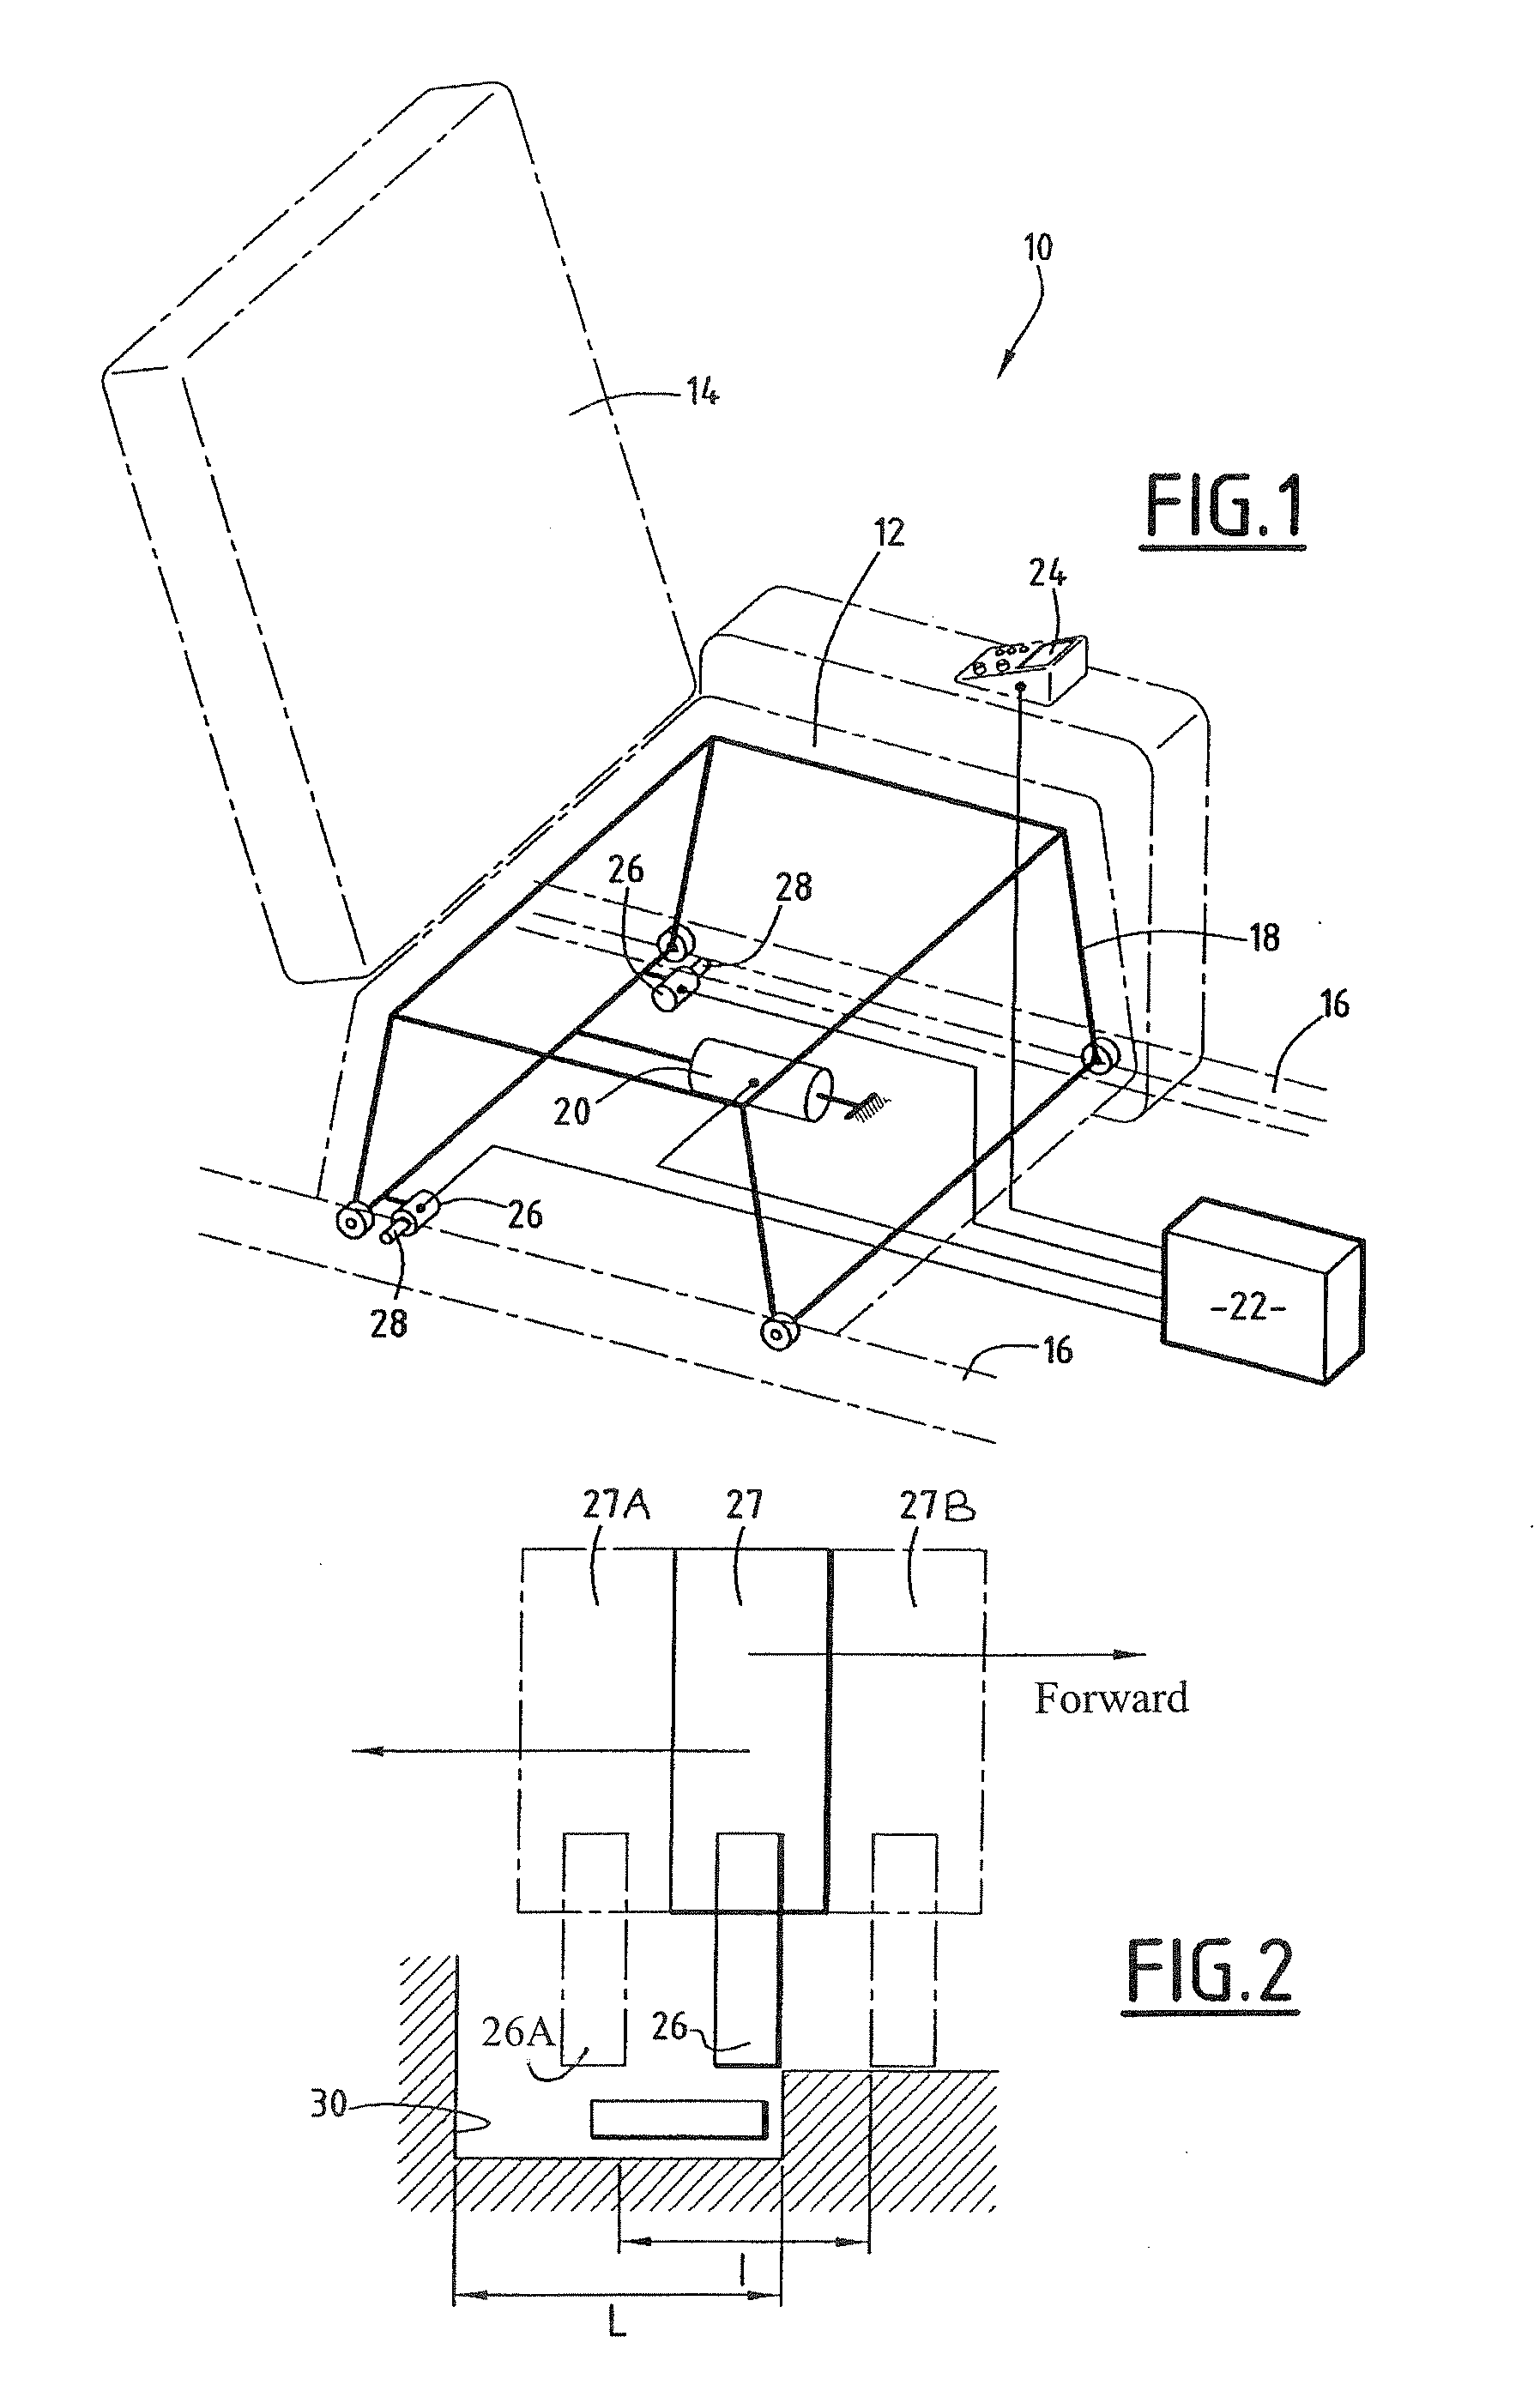 Method of controlling a seat